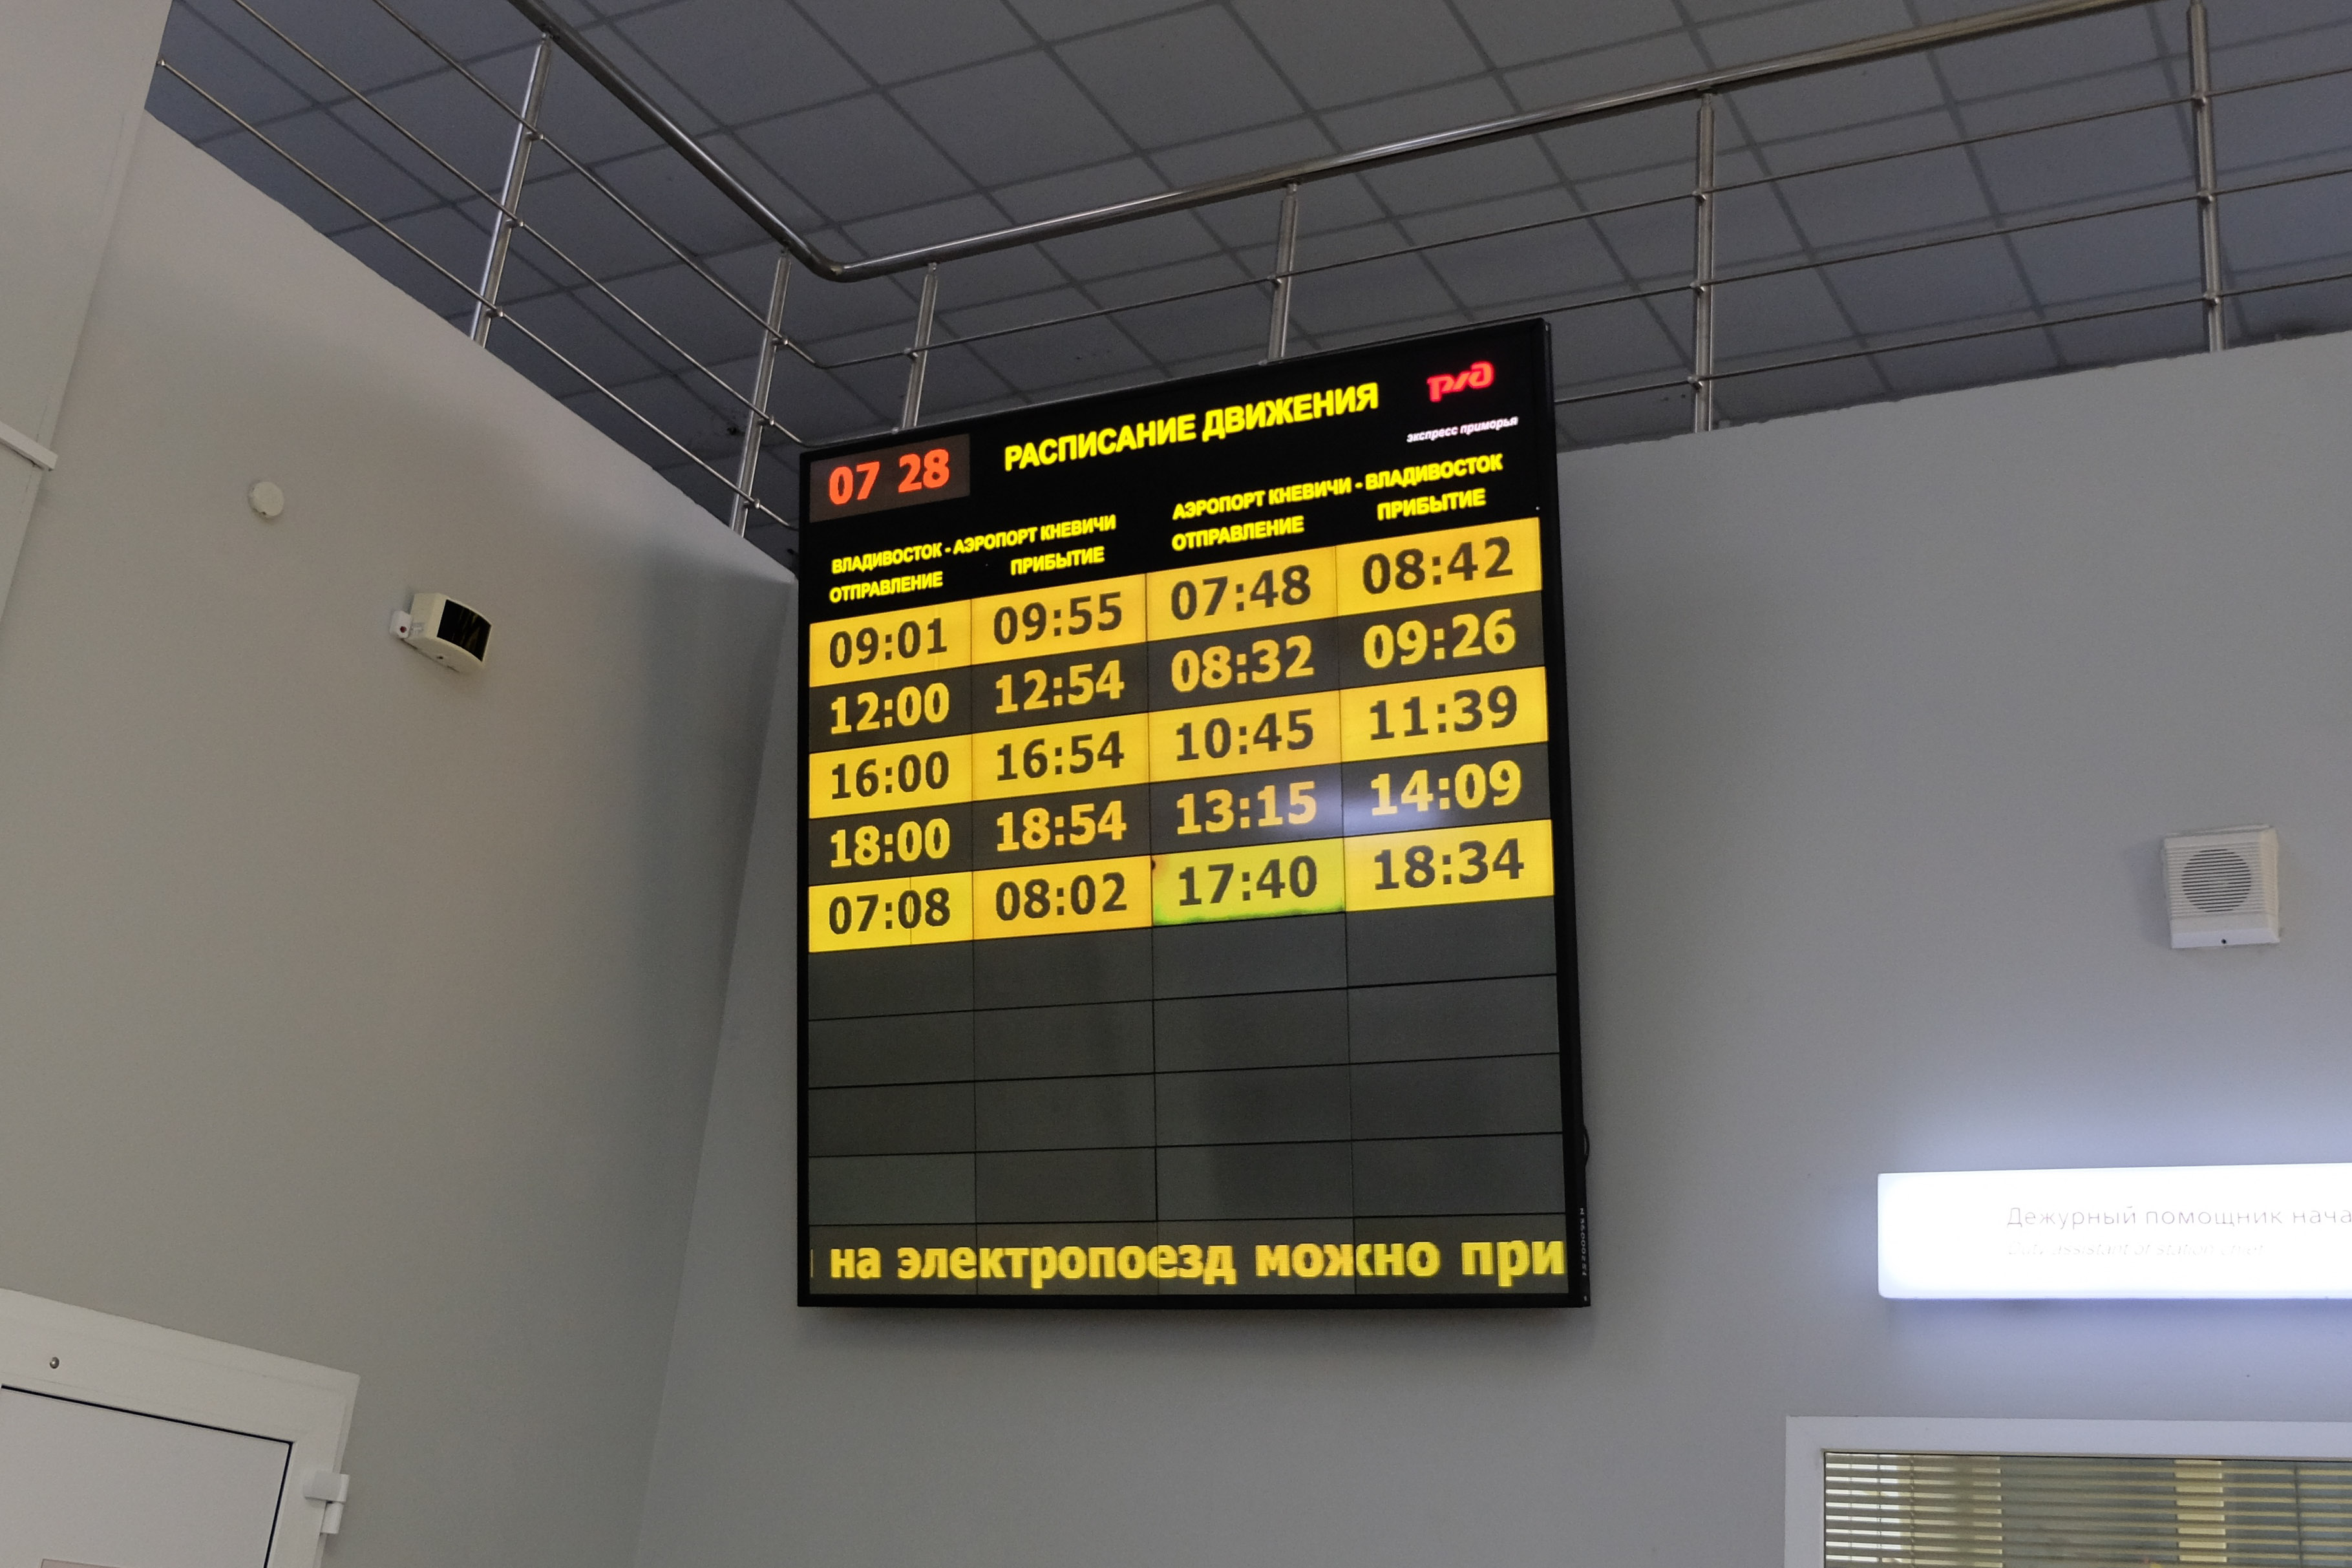 Timetable of the airport express